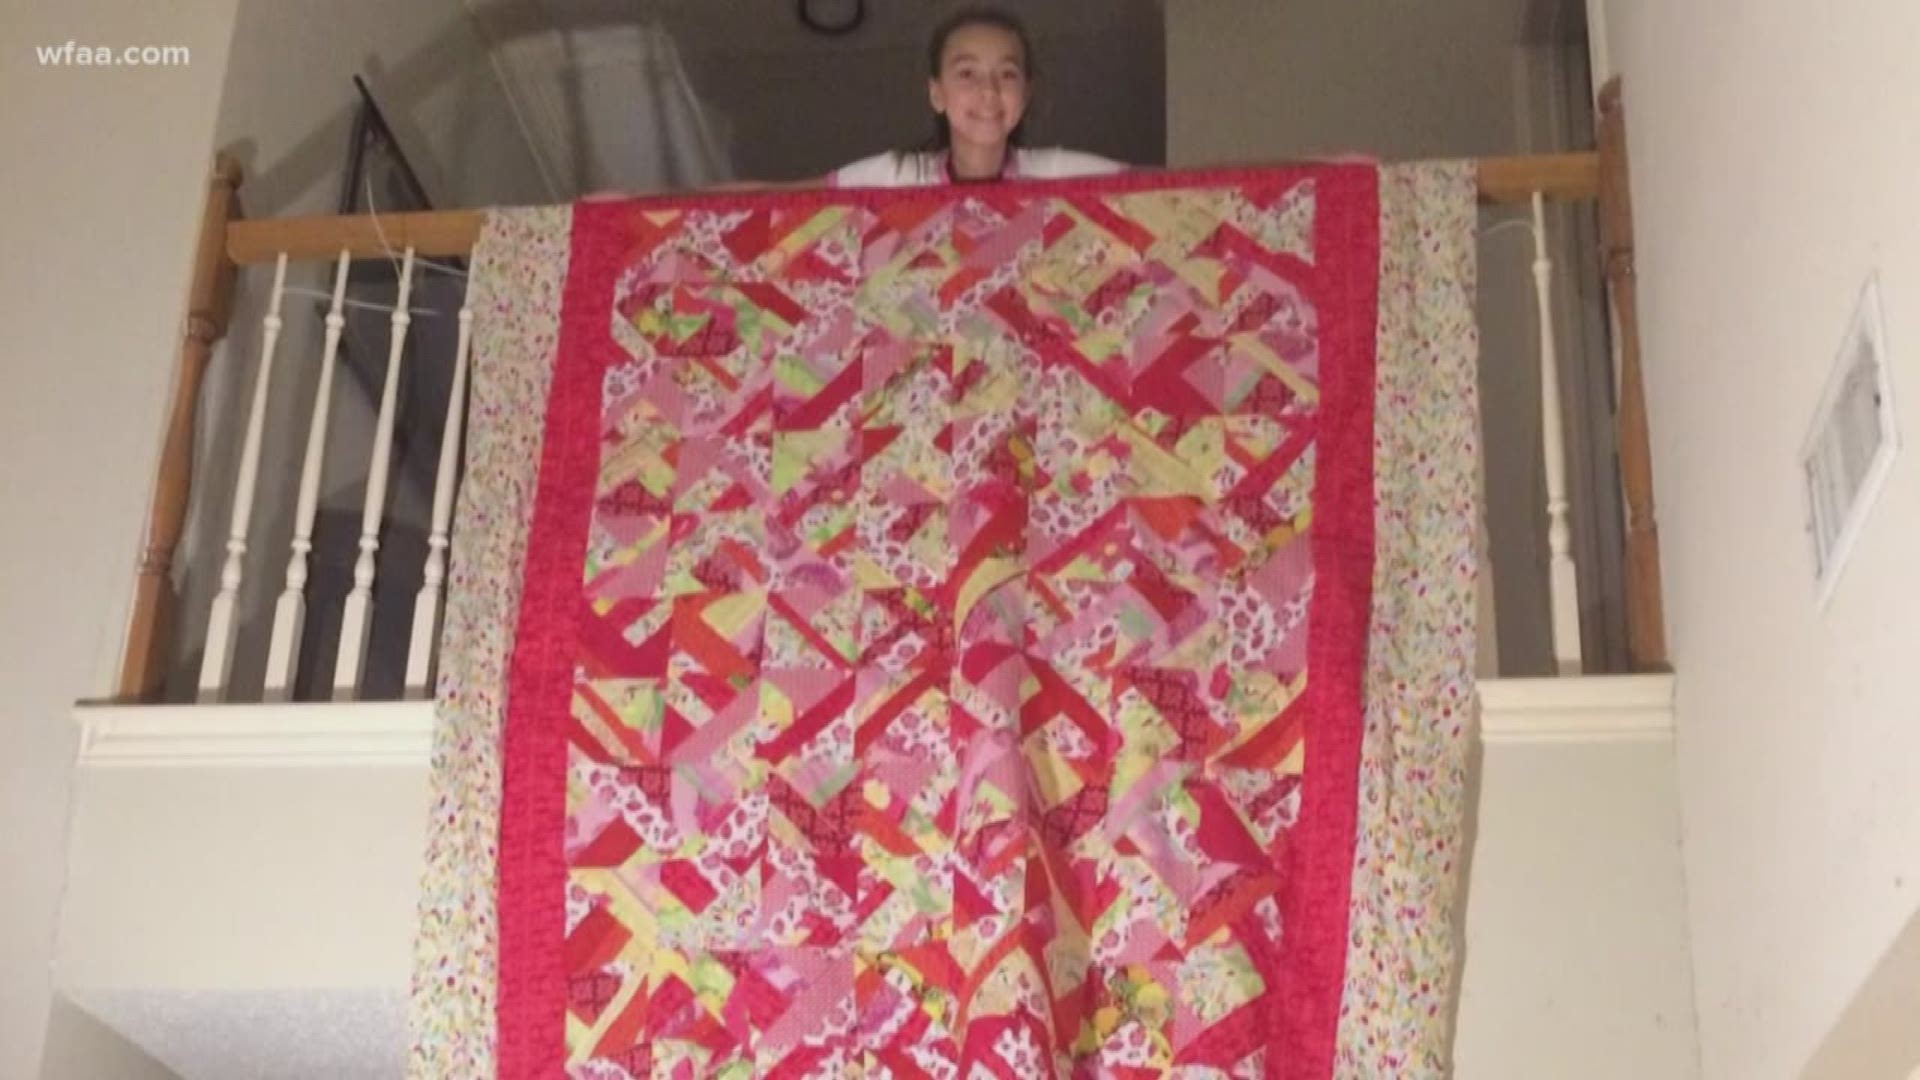 Thieves steal prize-winning quilts